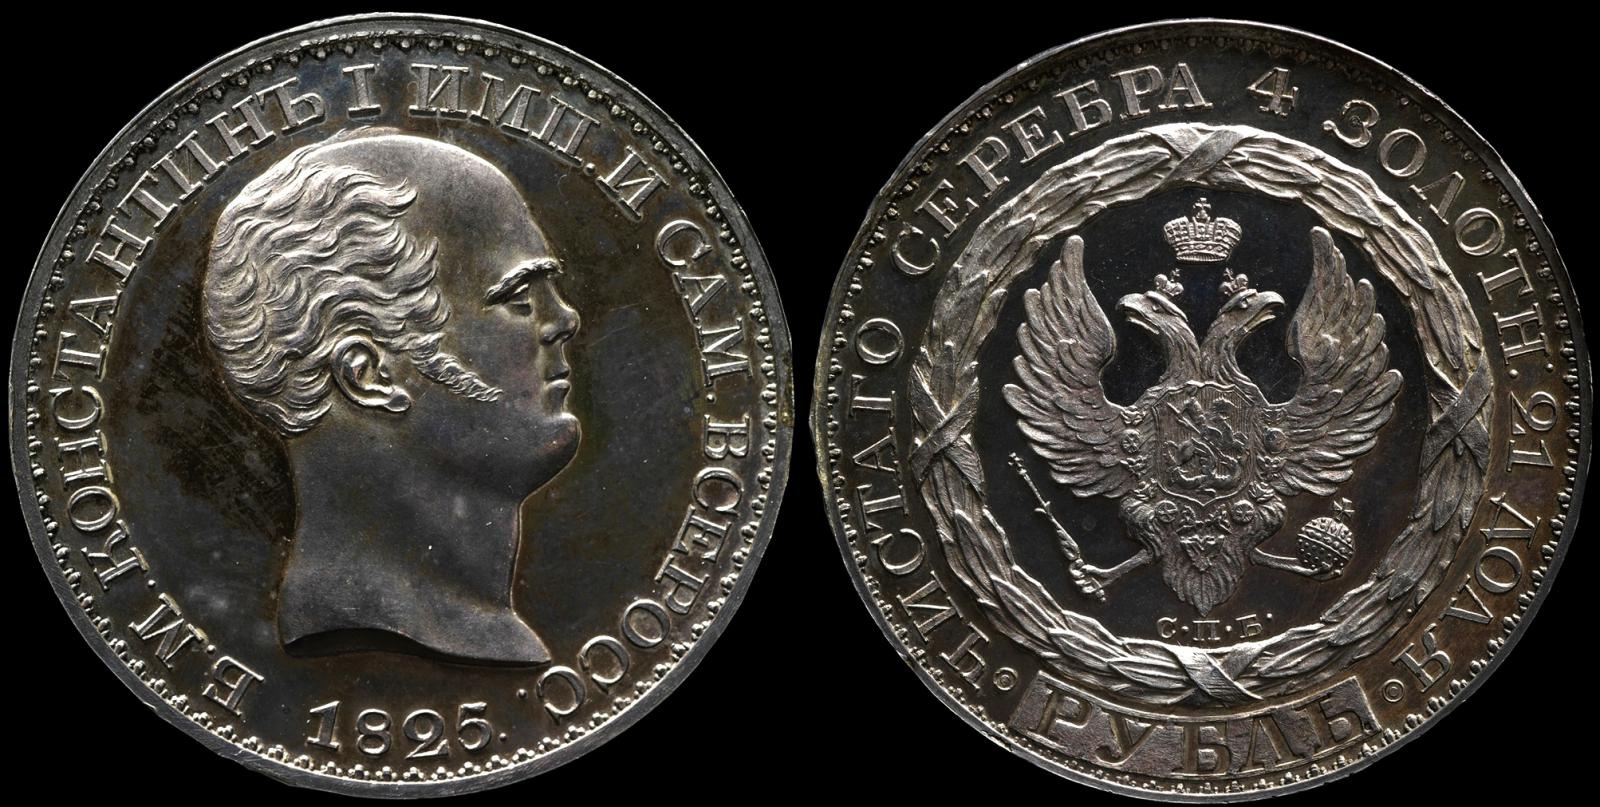 1825%20Constantine%20ruble%20with%20edge%20calibration%20marks.jpg